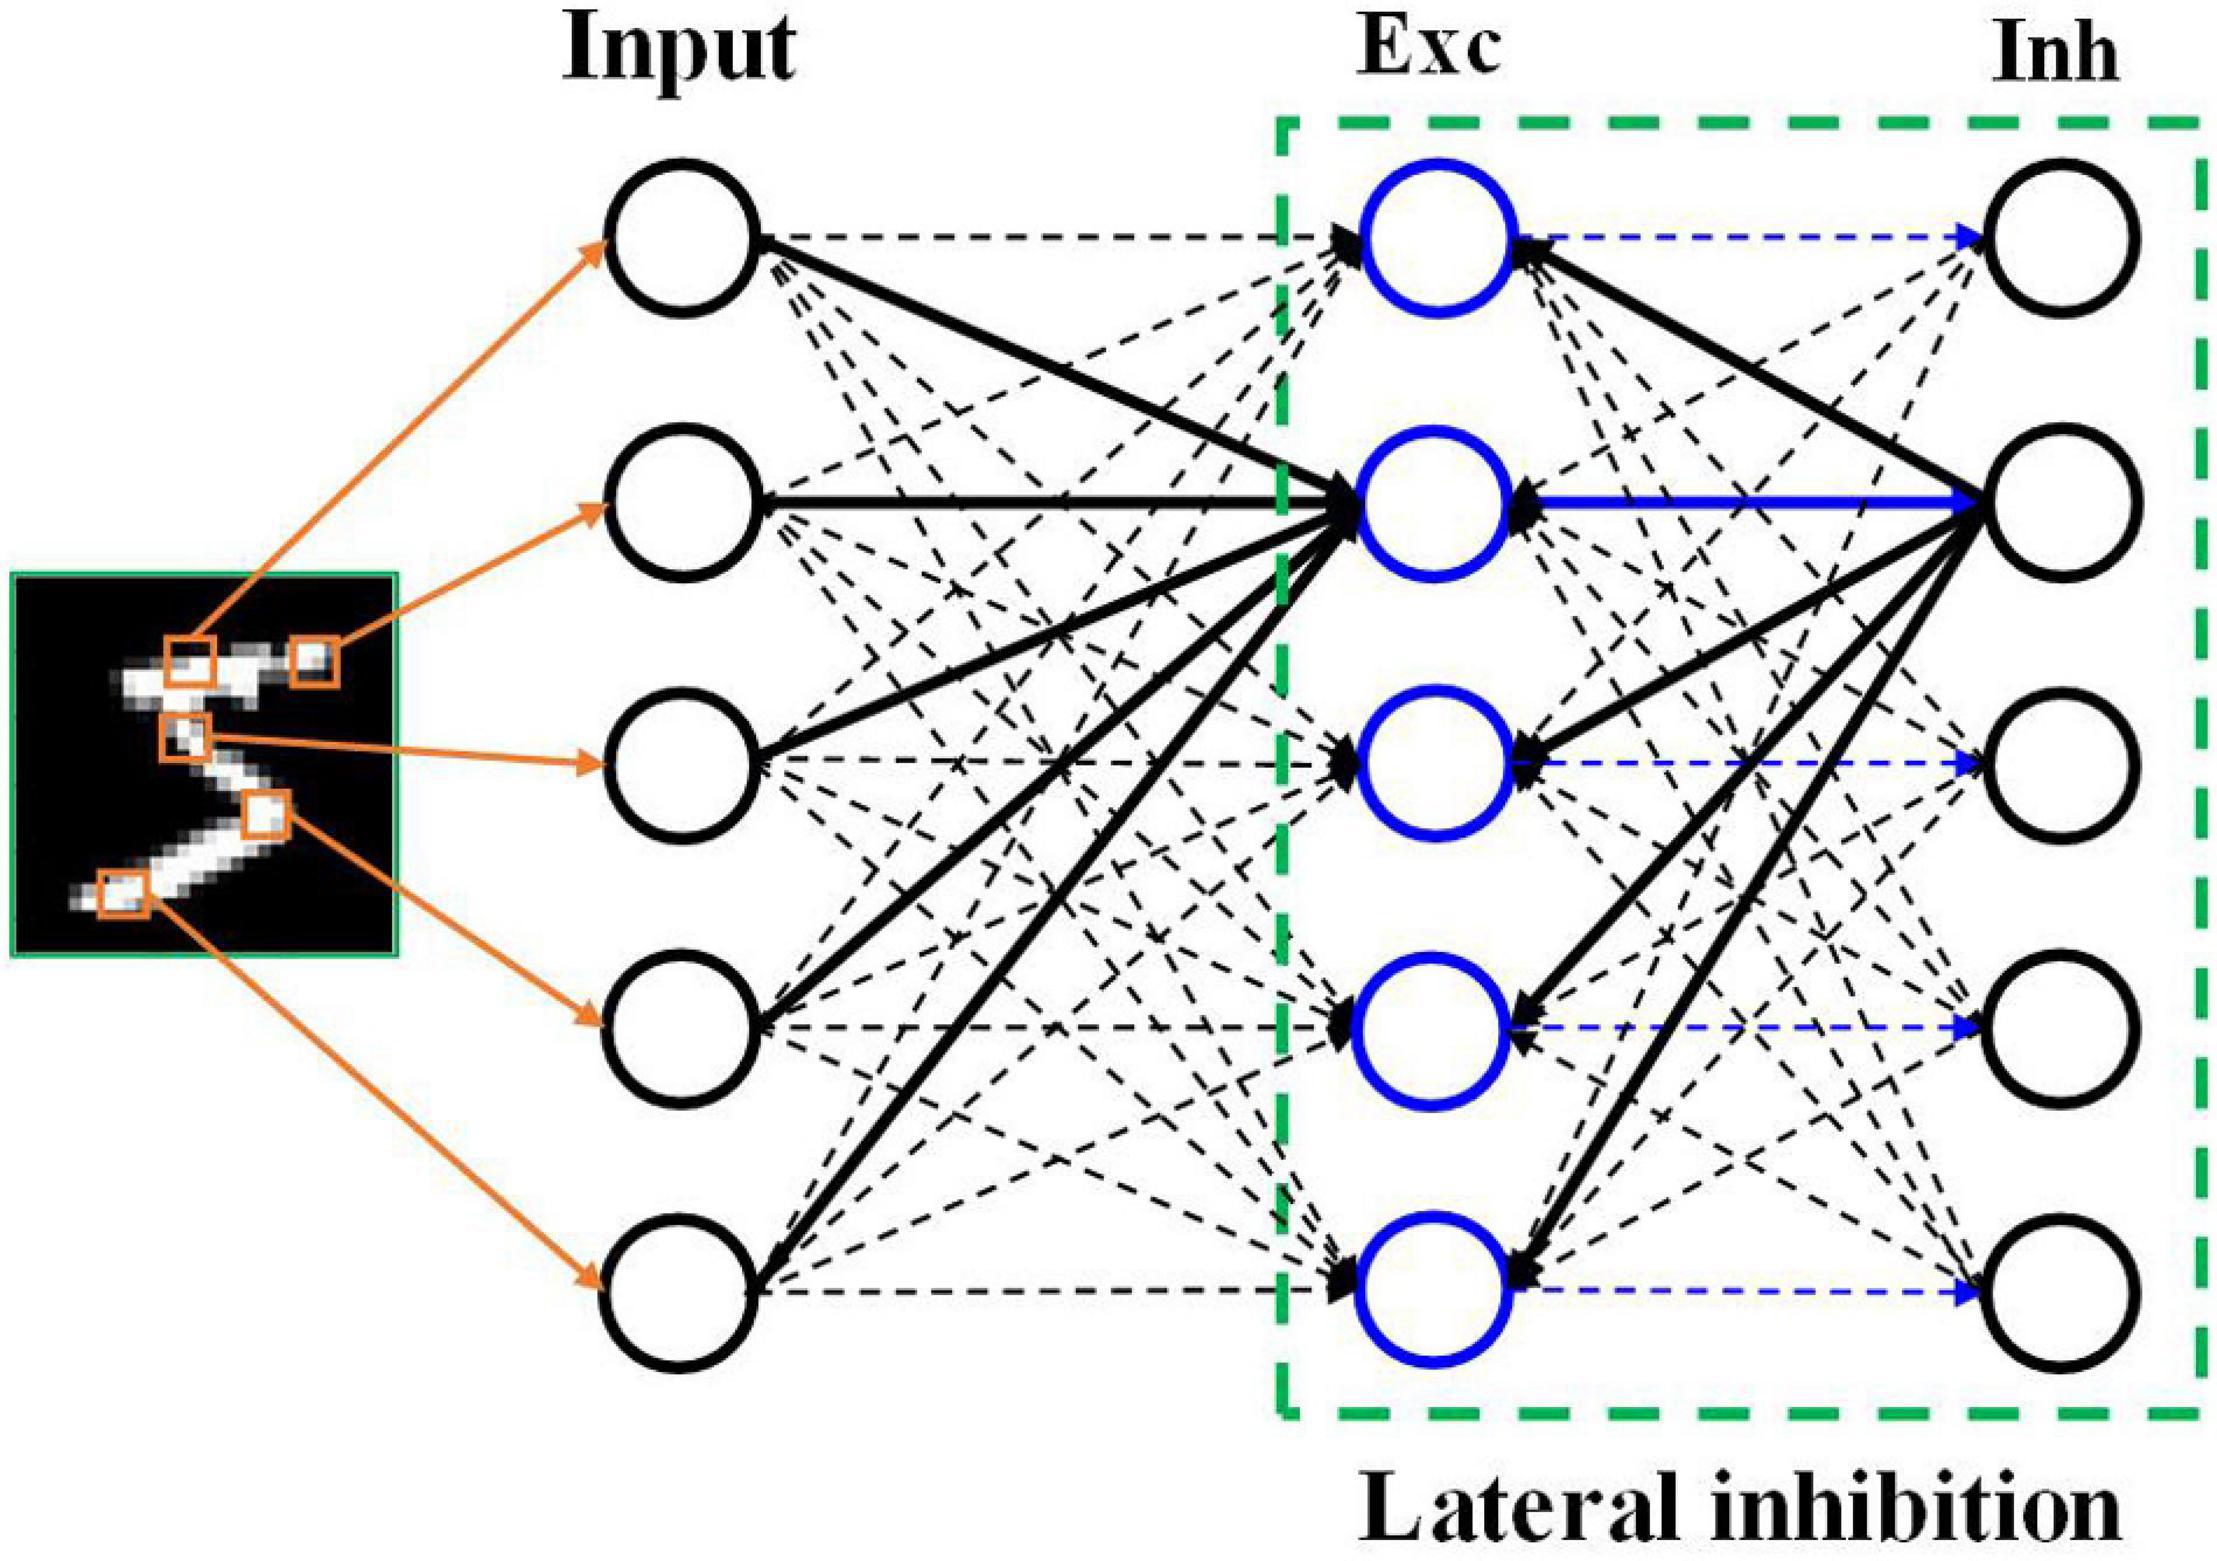 Simple neural networks outperform the state-of-the-art for